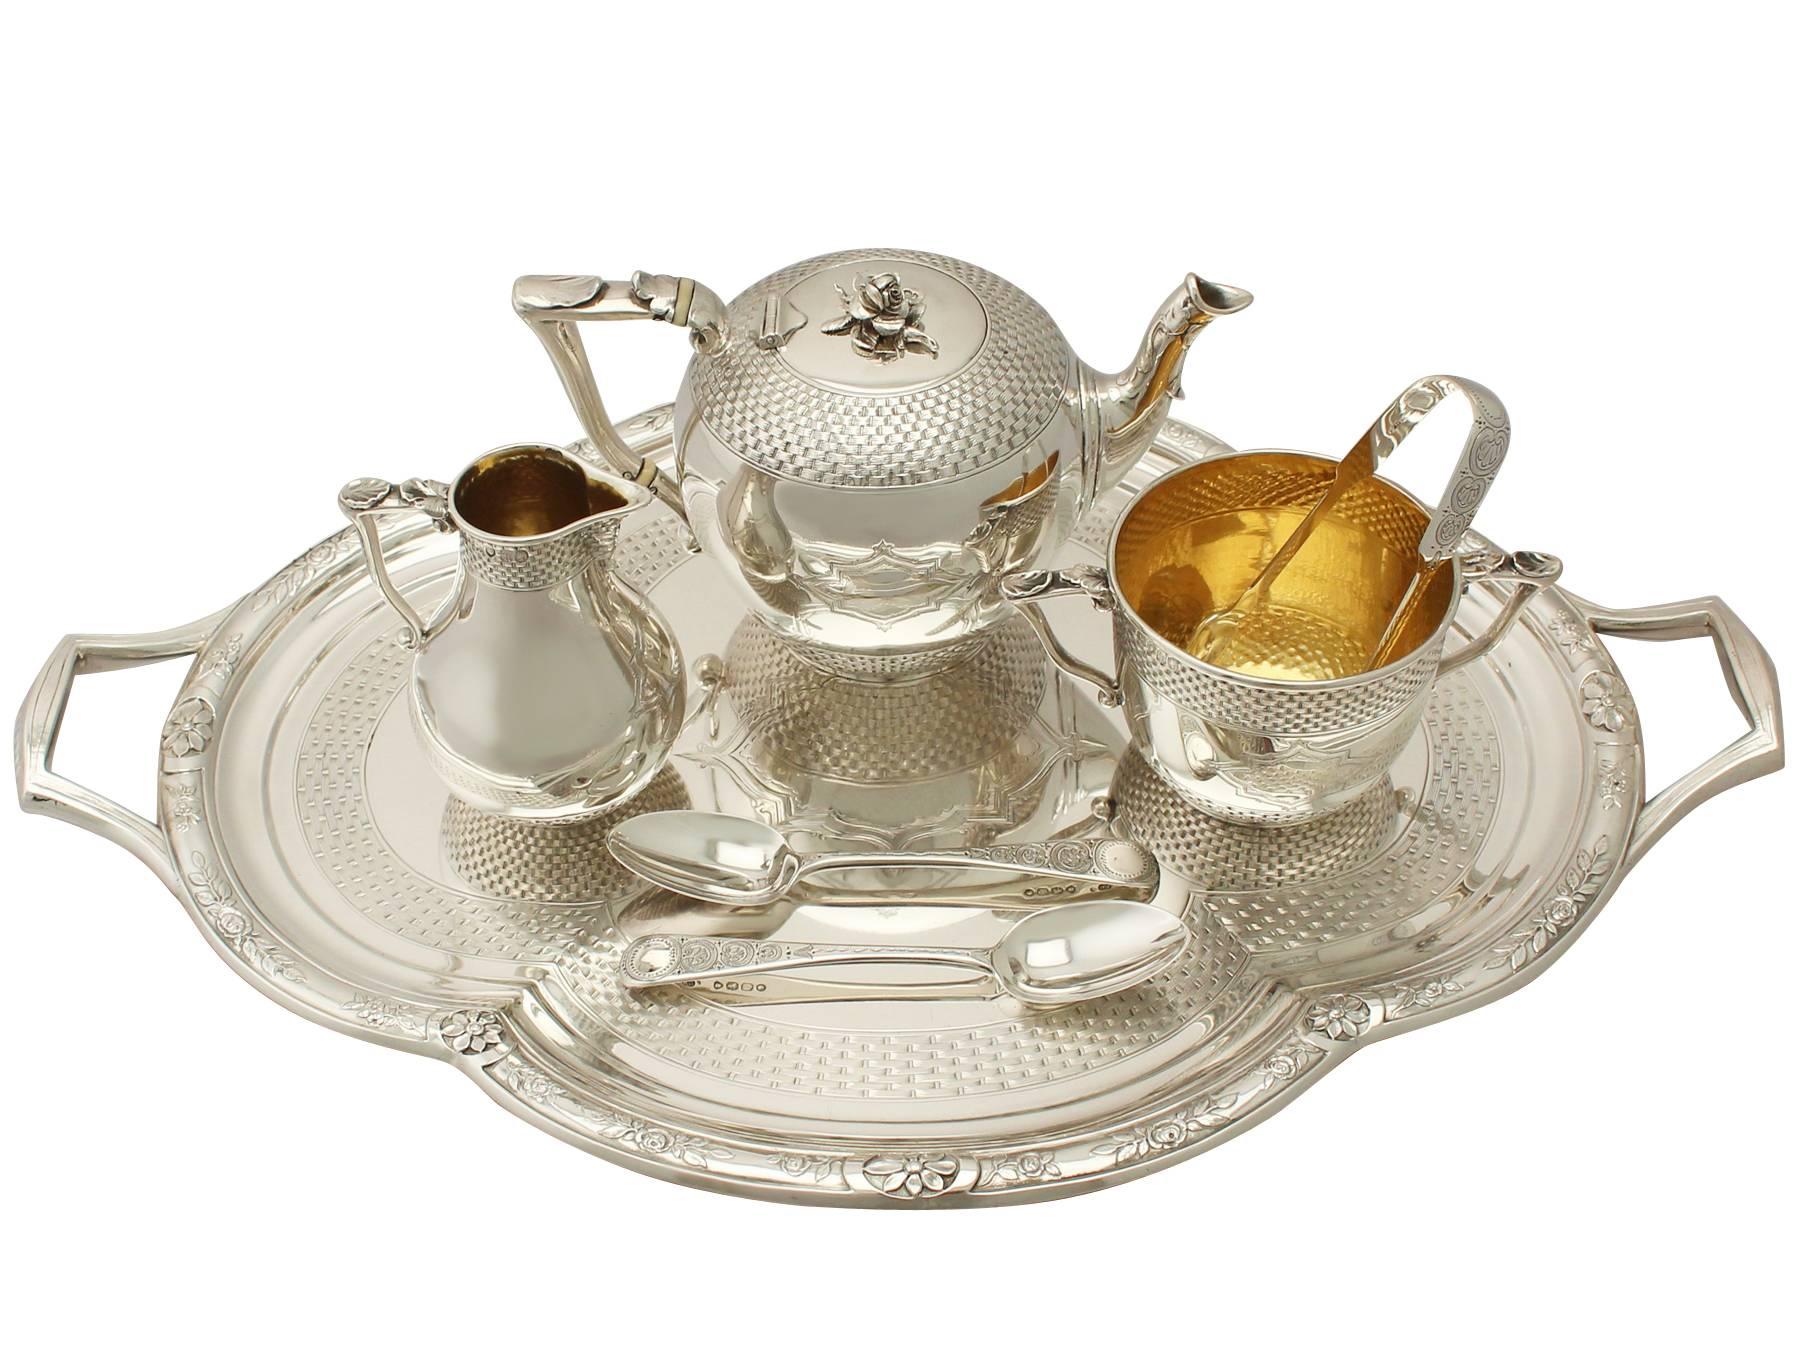 This exceptional antique sterling silver bachelor tea service consists of a teapot, cream jug, sugar bowl and a tea tray.

Each piece of this Victorian silver tea set has a plain circular rounded form onto a collet style base.

The upper and